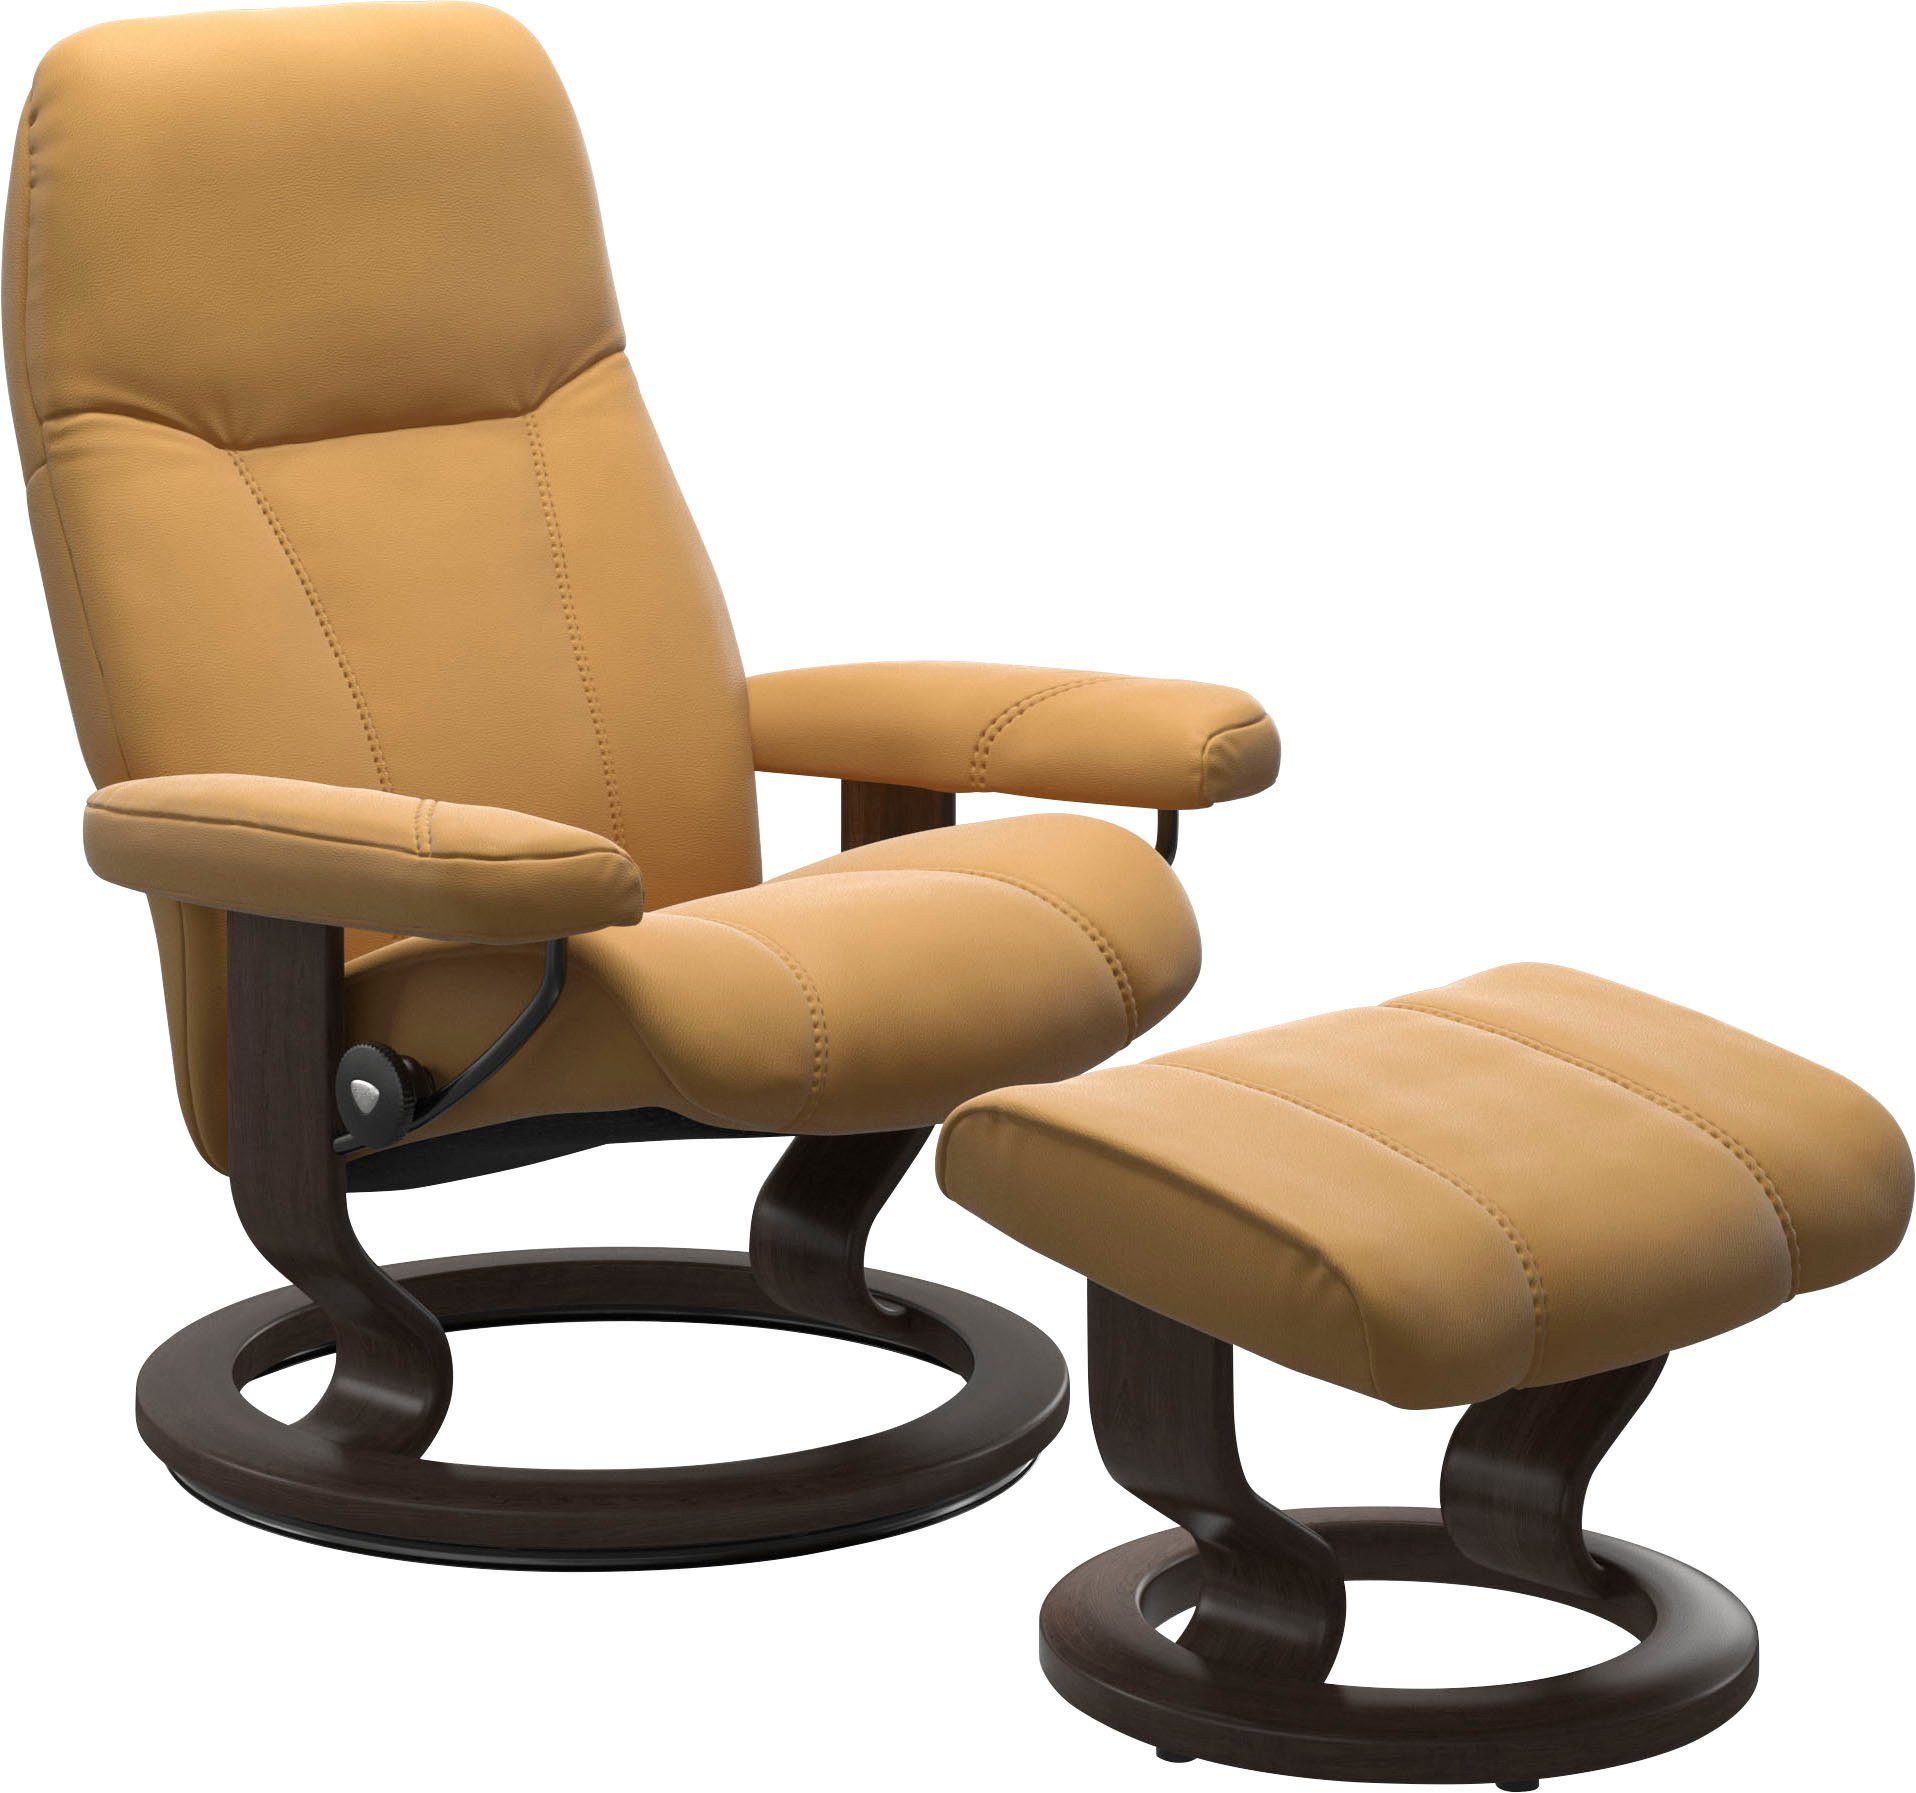 Stressless® Relaxsessel Gestell Größe Classic Consul, Base, mit Wenge M